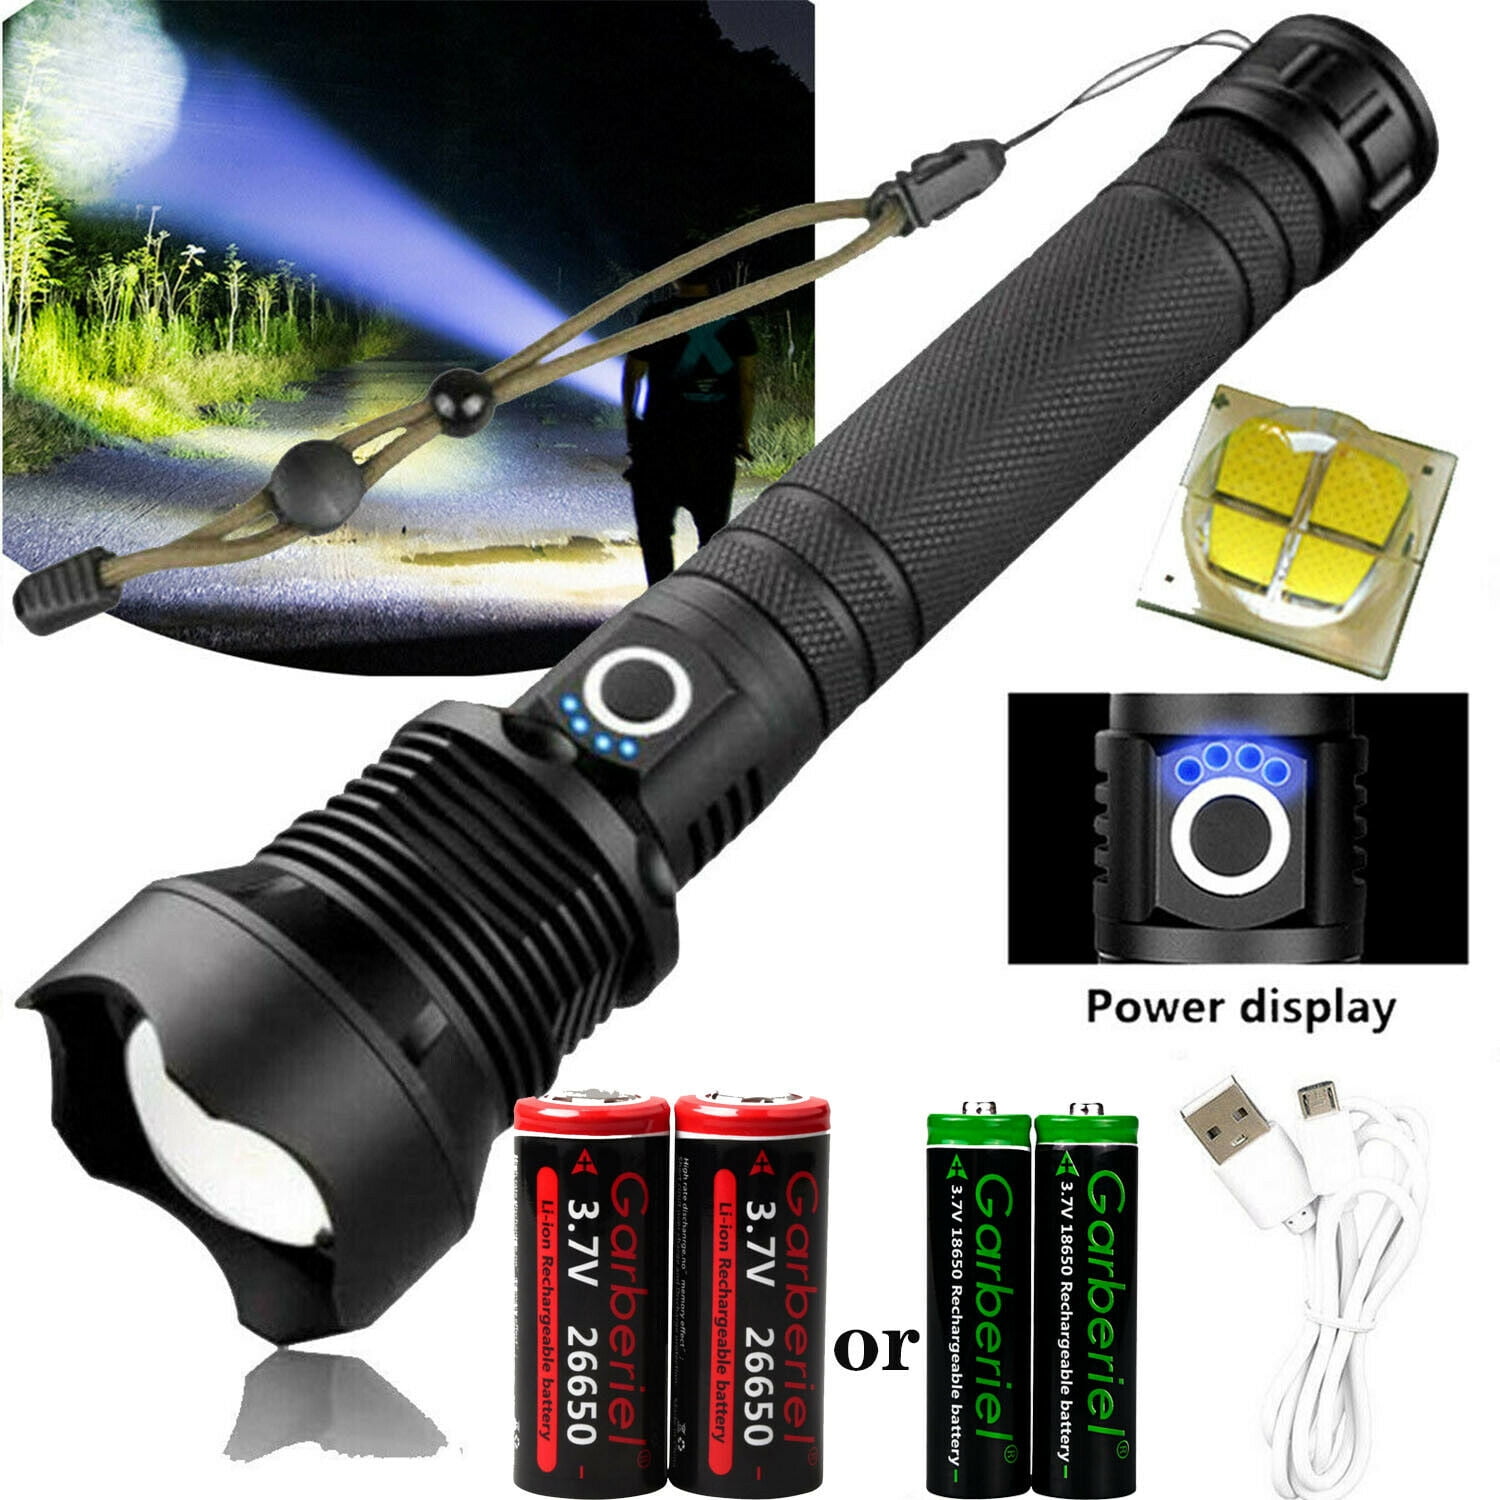 990000 Lumens Zoom SWAT Flashlight XHP70 LED USB Rechargeable Torch Super Bright